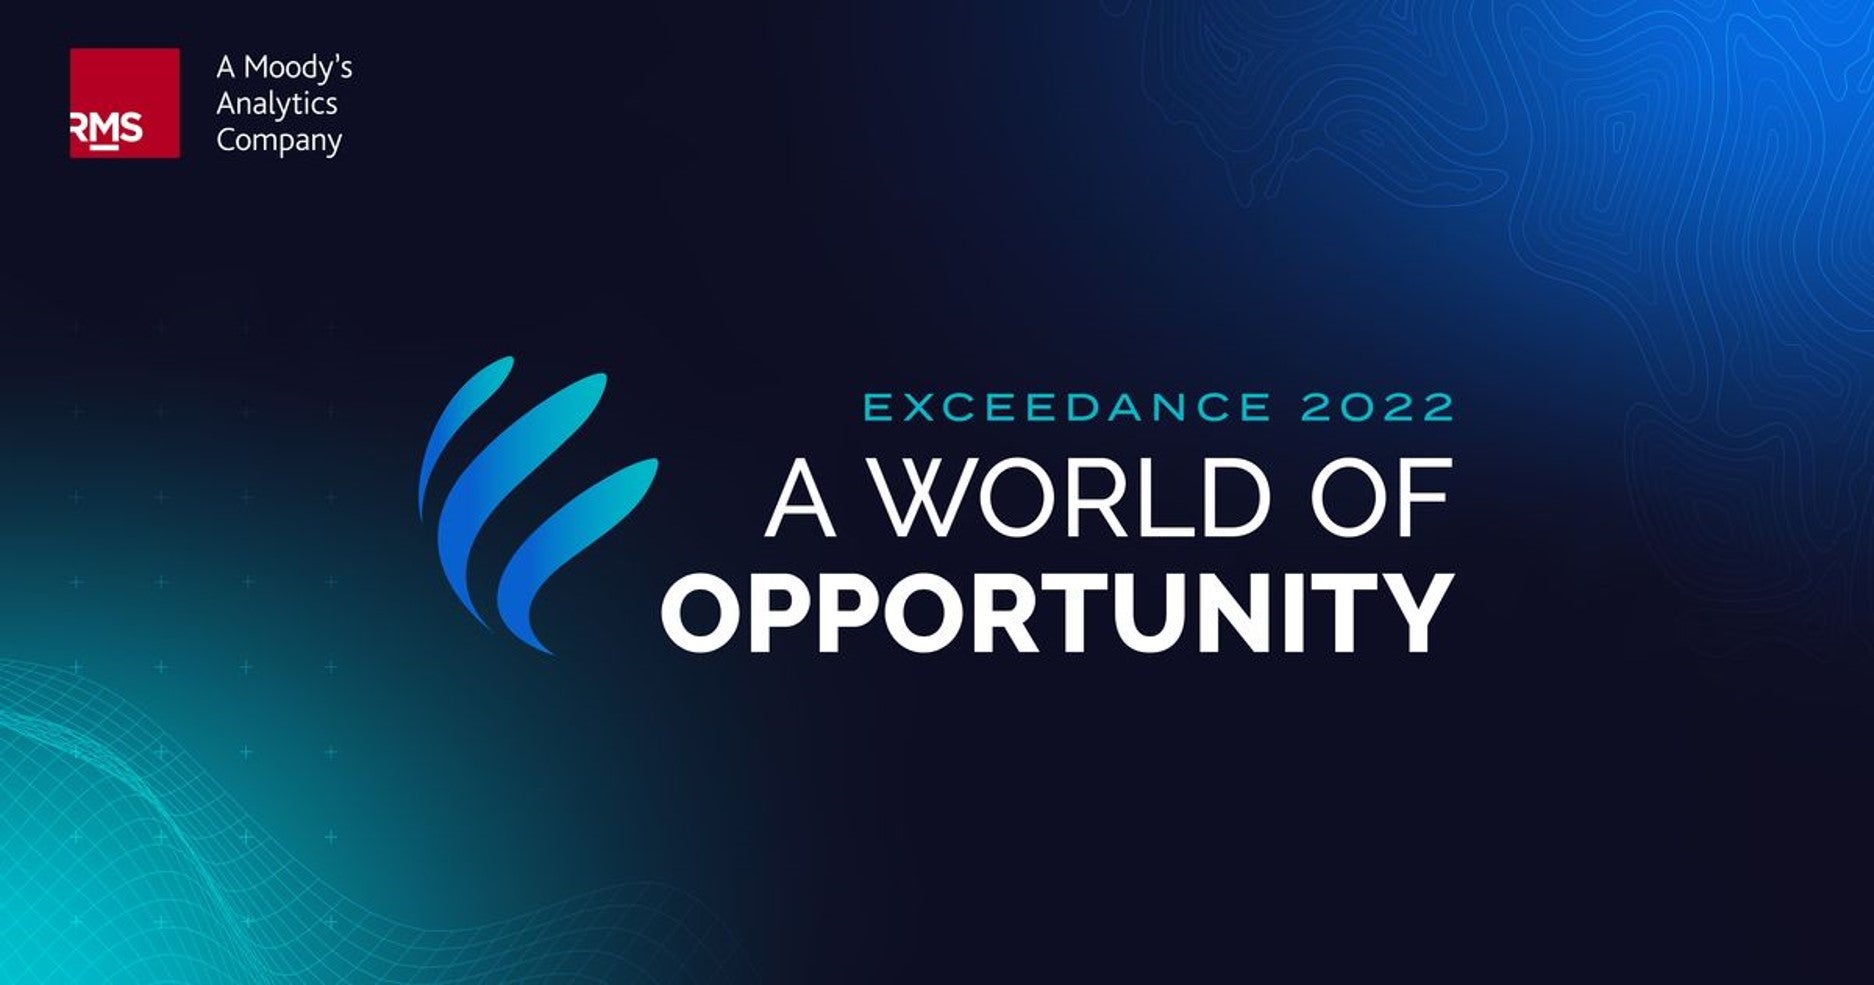 Exceedance 2022: A World of Opportunity